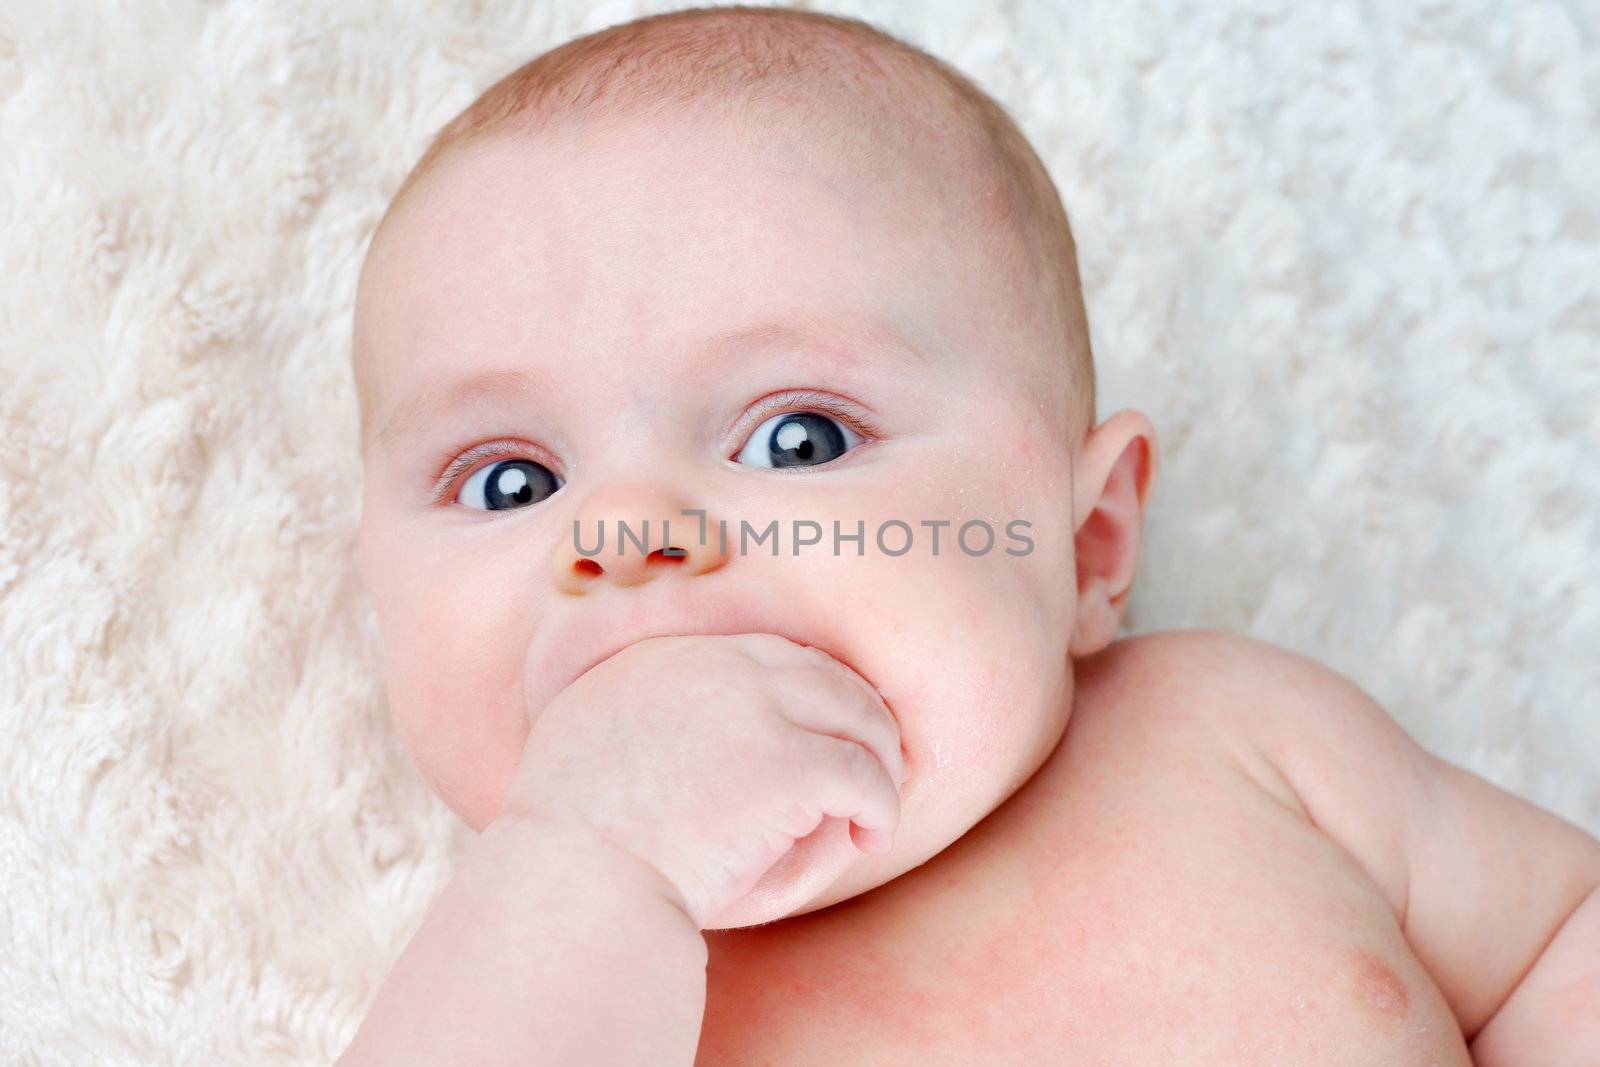 Portrait of beautiful 3 months old baby teething and sucking on its hand to sooth itself